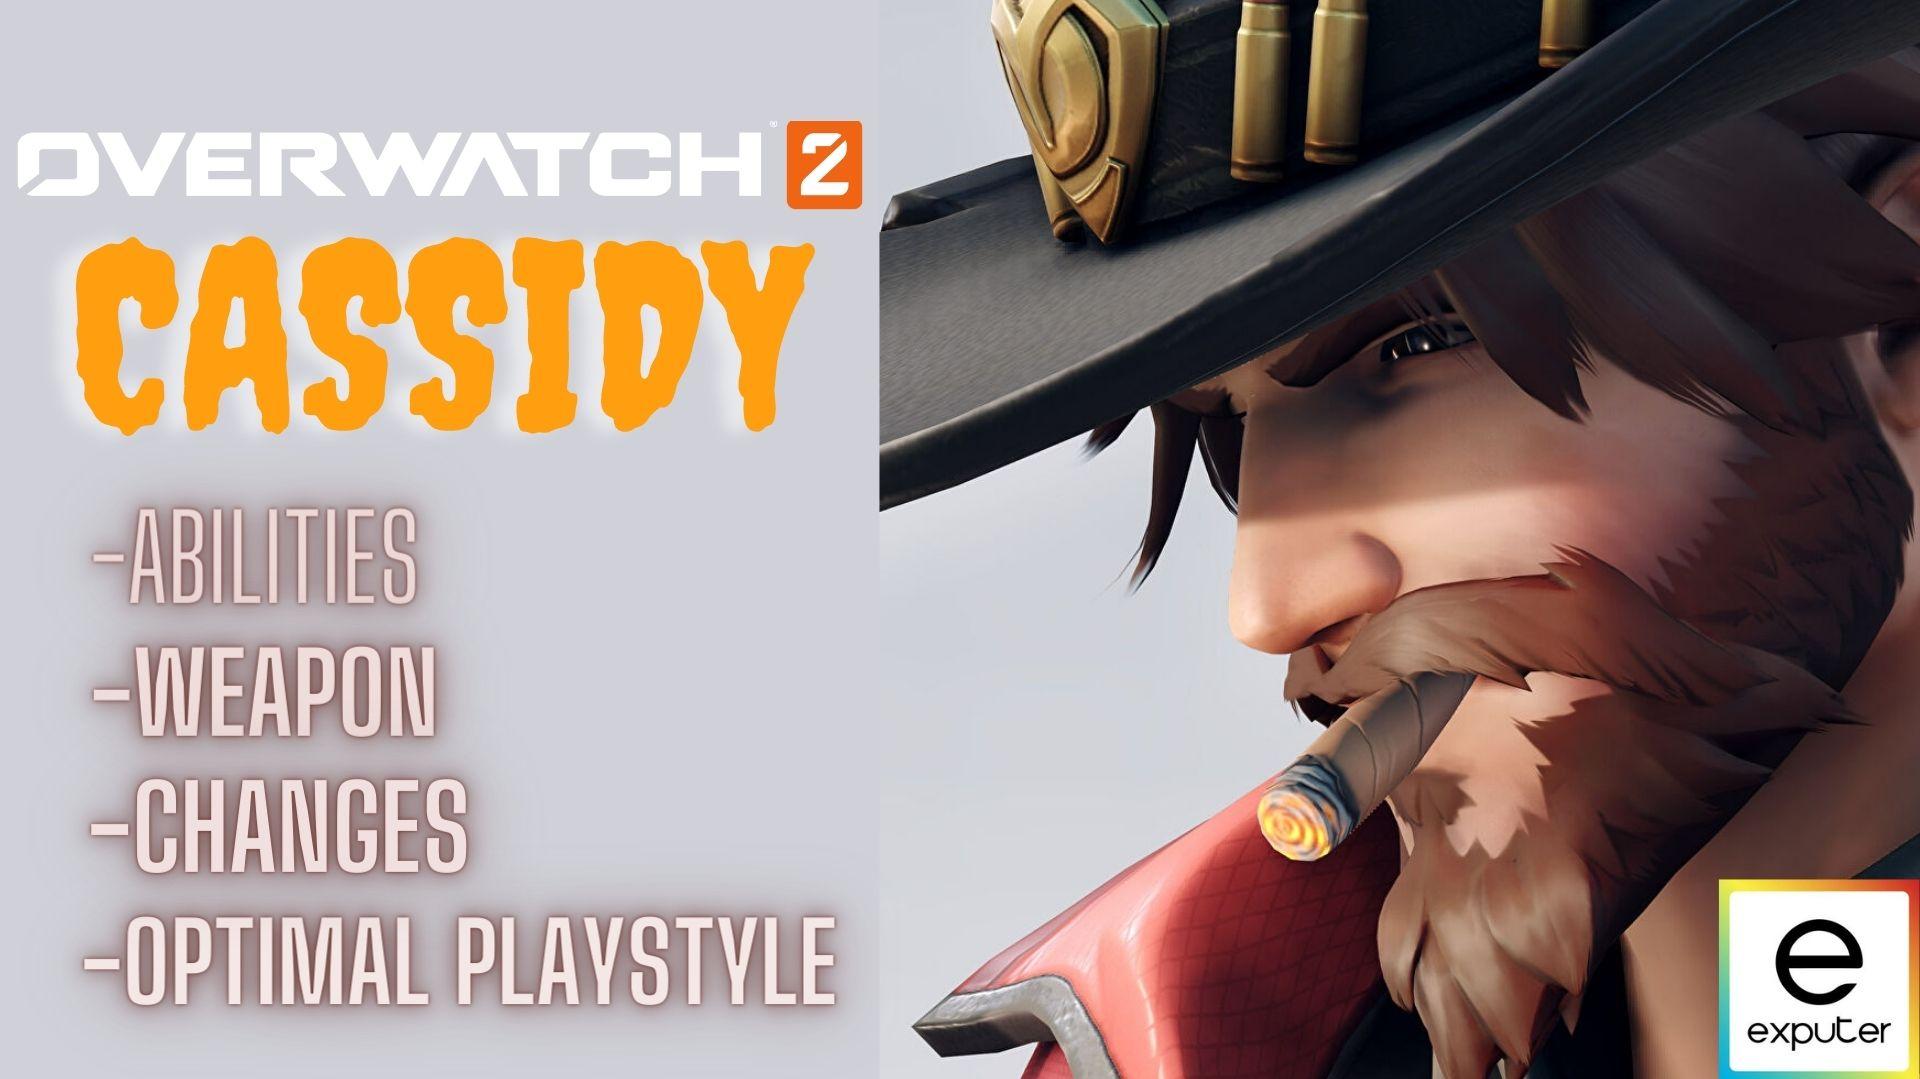 Overwatch Cassidy Abilities Changes Playstyle Exputer